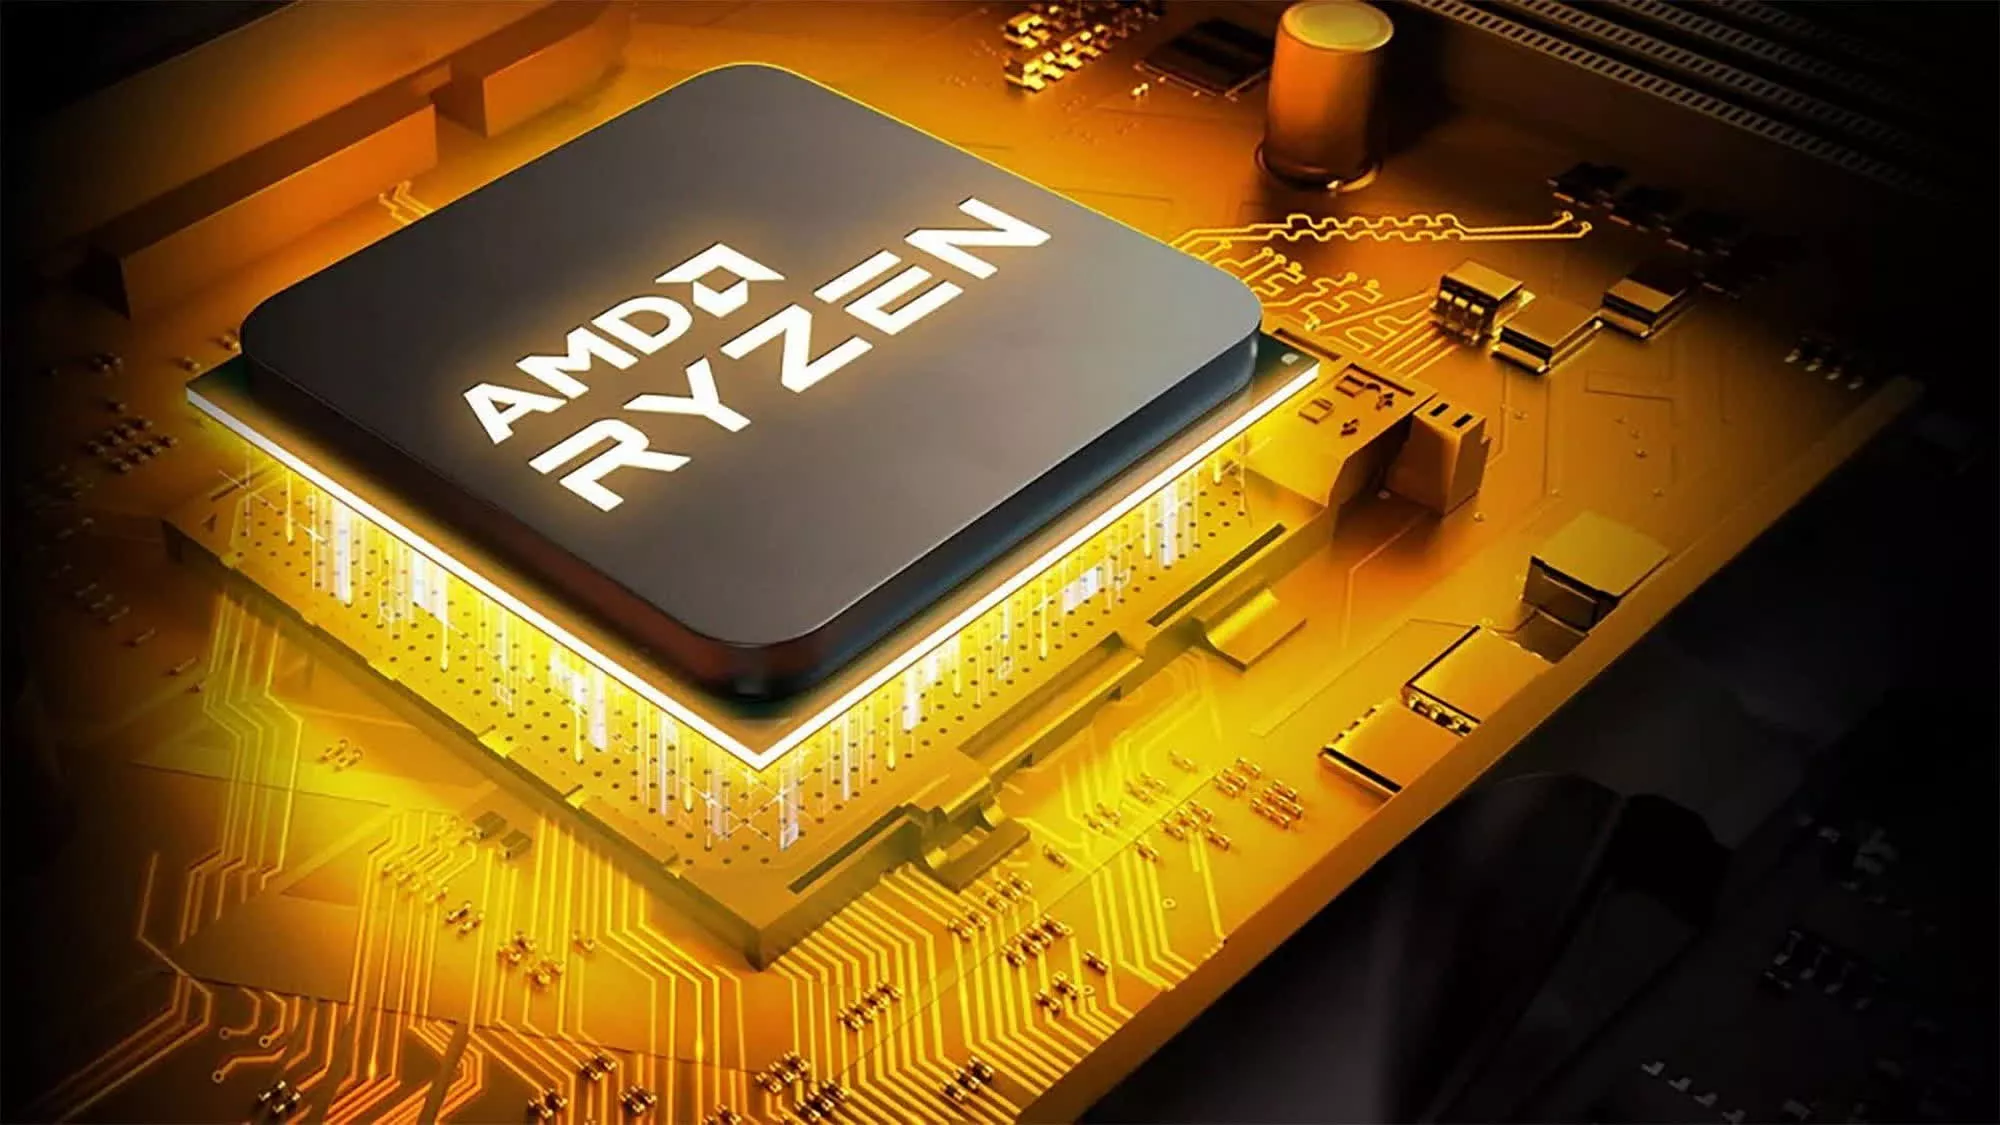 AMD planning to replace AGESA firmware with open source alternative openSIL